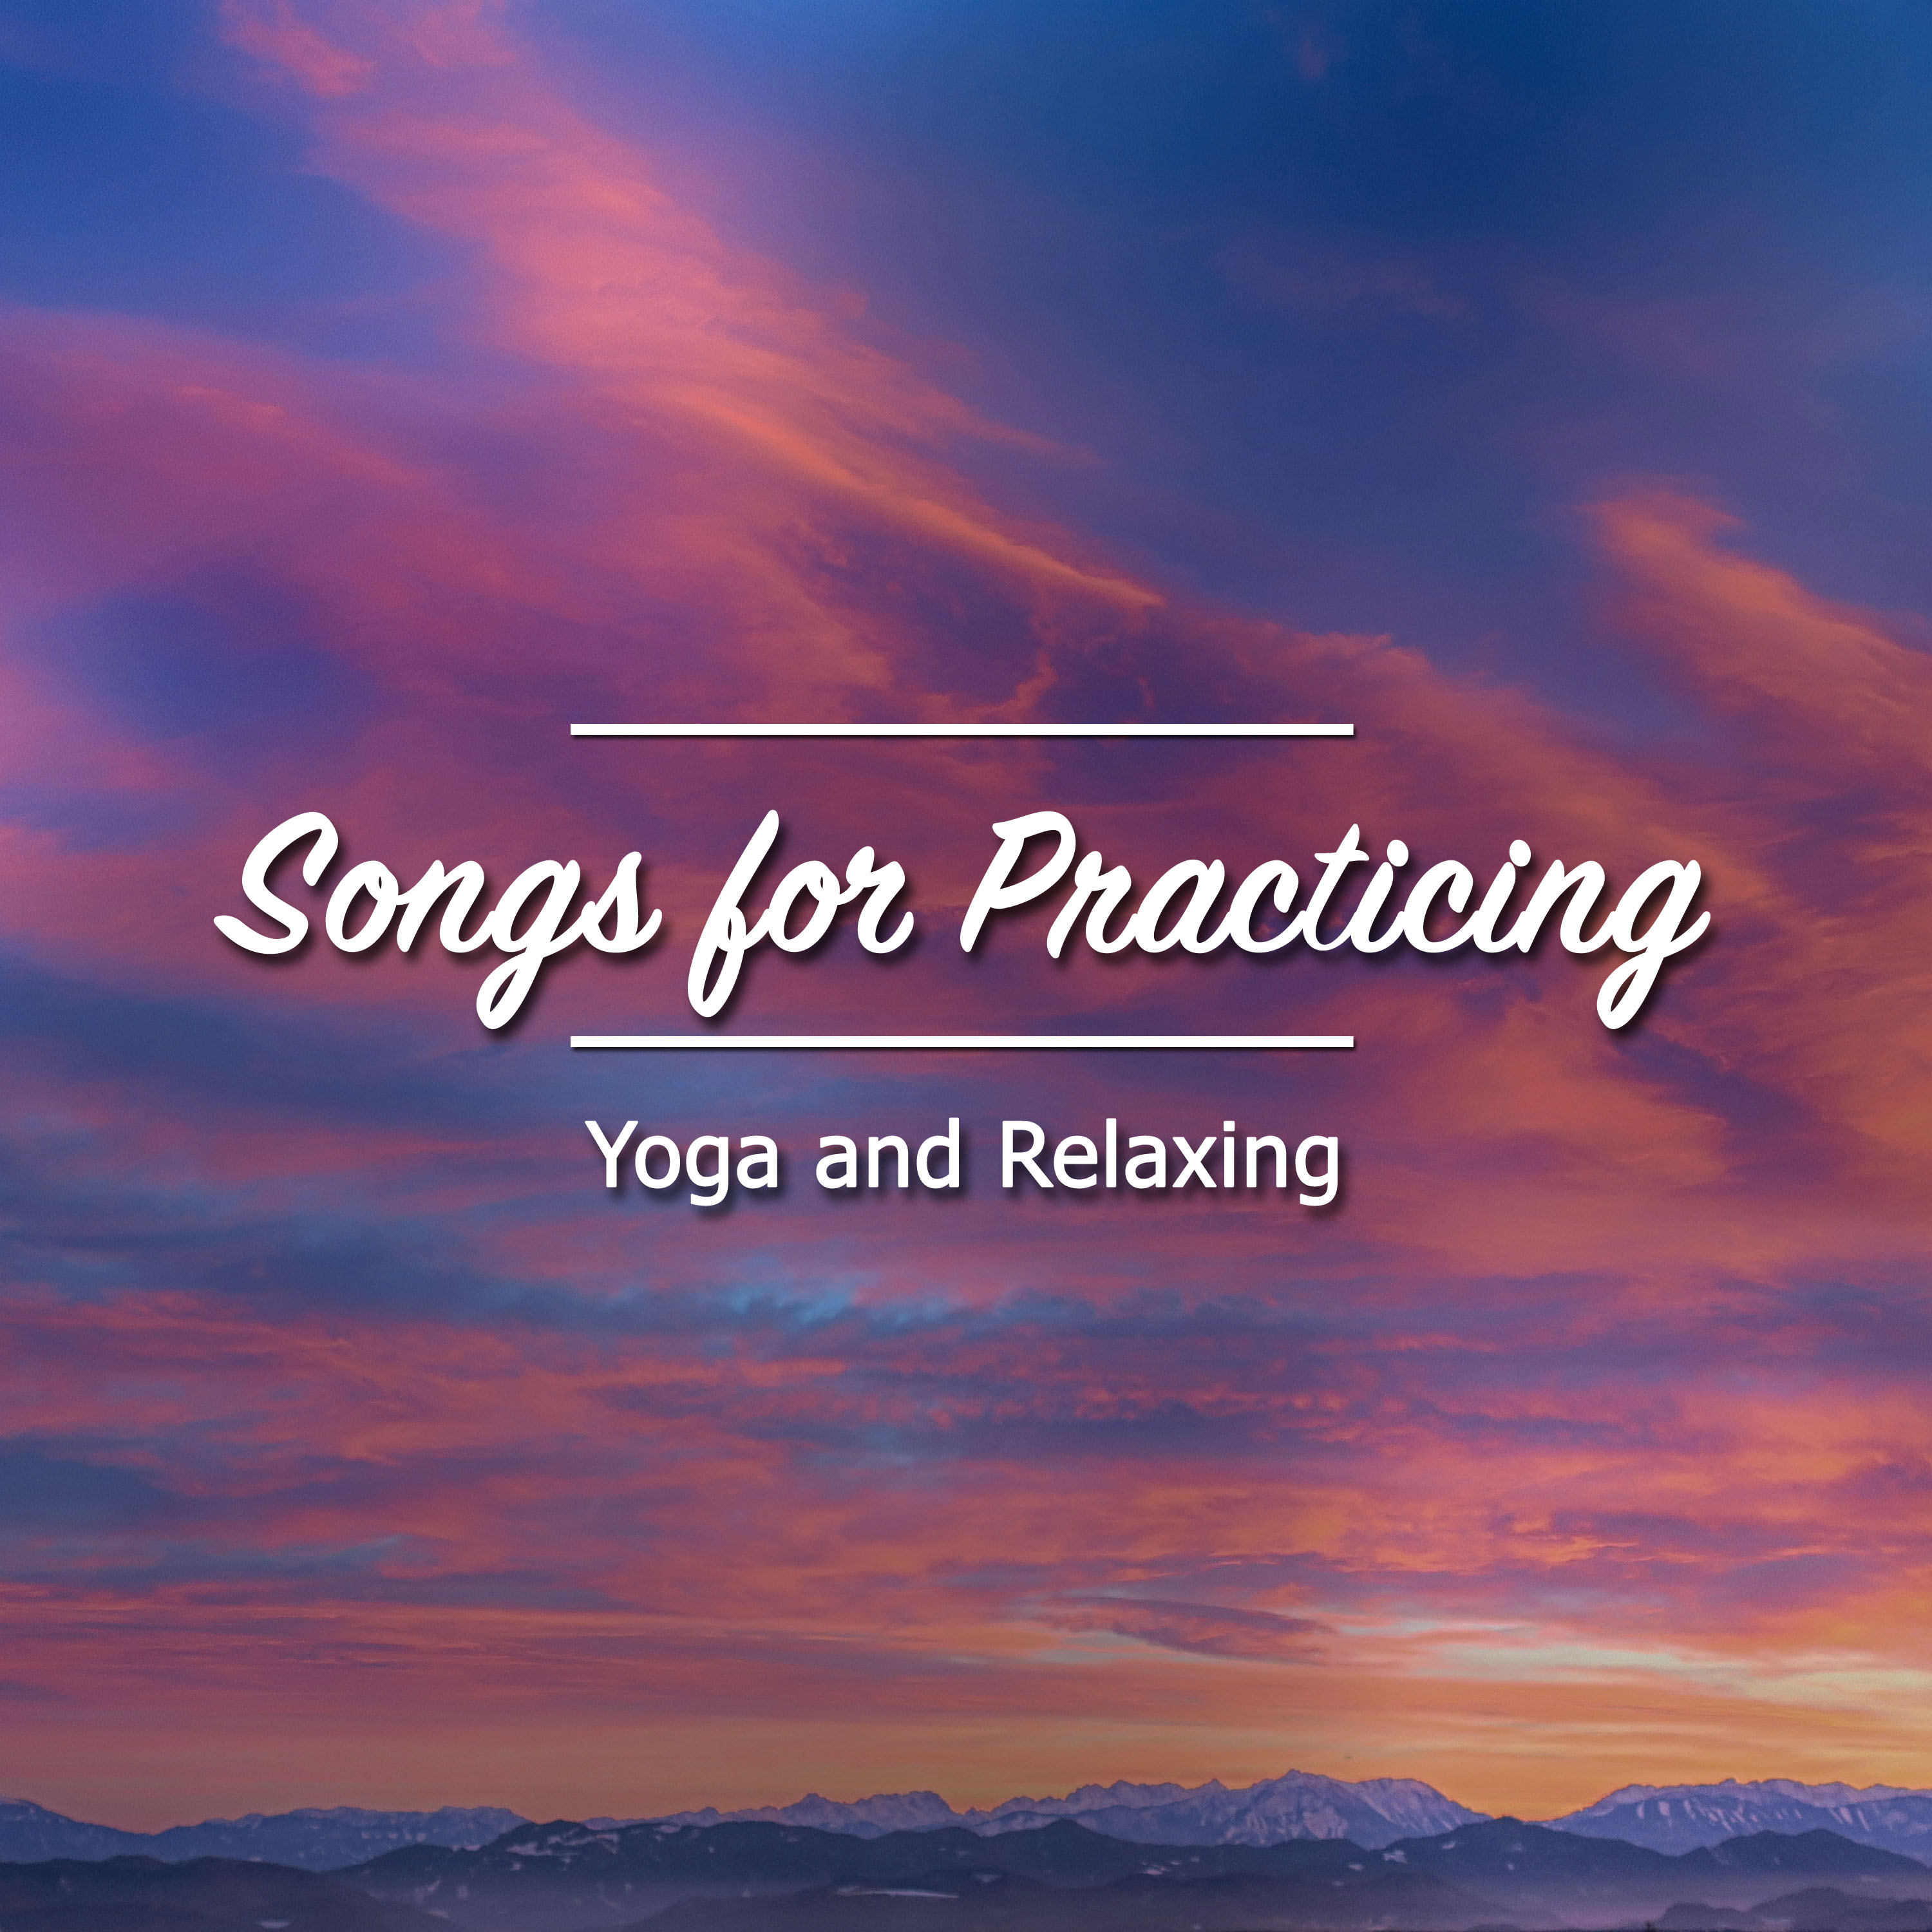 19 Songs for Practicing Yoga and Relaxing